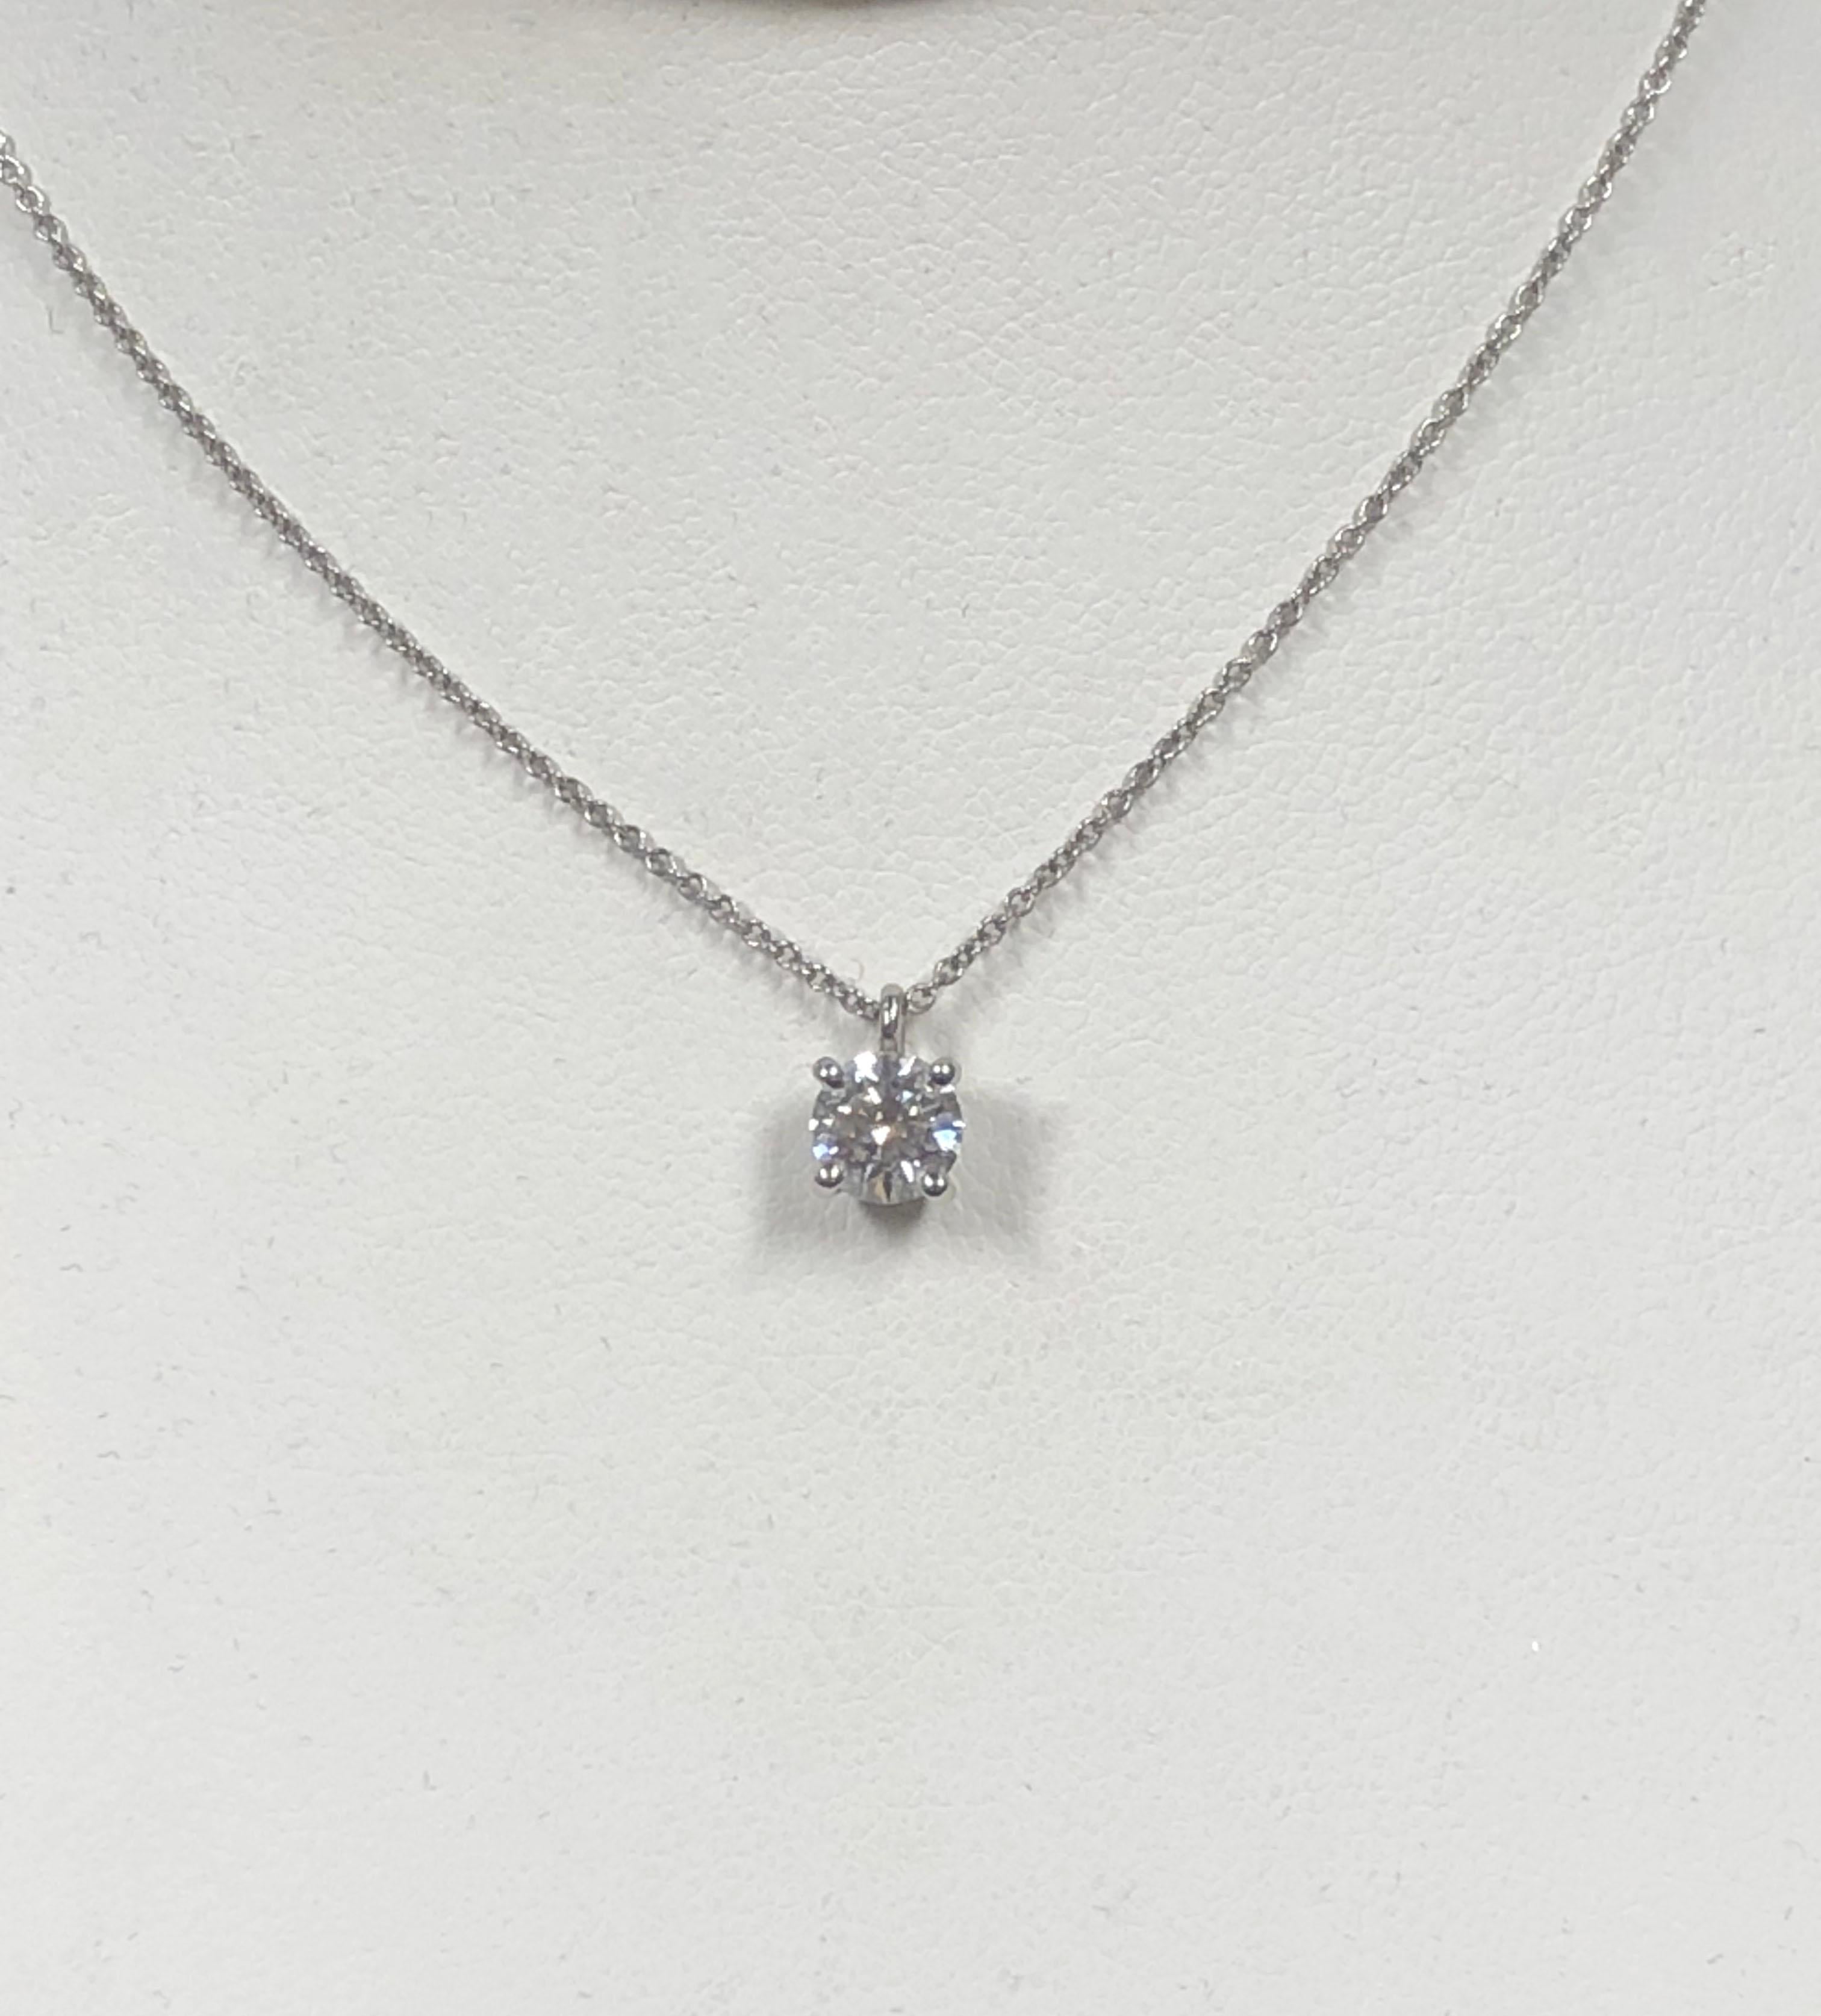 Circa 2010 Tiffany & Company Diamond Solitaire Pendant Necklace, suspended from a 16 inch Platinum chain, a Platinum 4 prong mount holds a .61 Carat Round Brilliant cut Diamond that is G in color and VS in clarity, comes in the original Tiffany